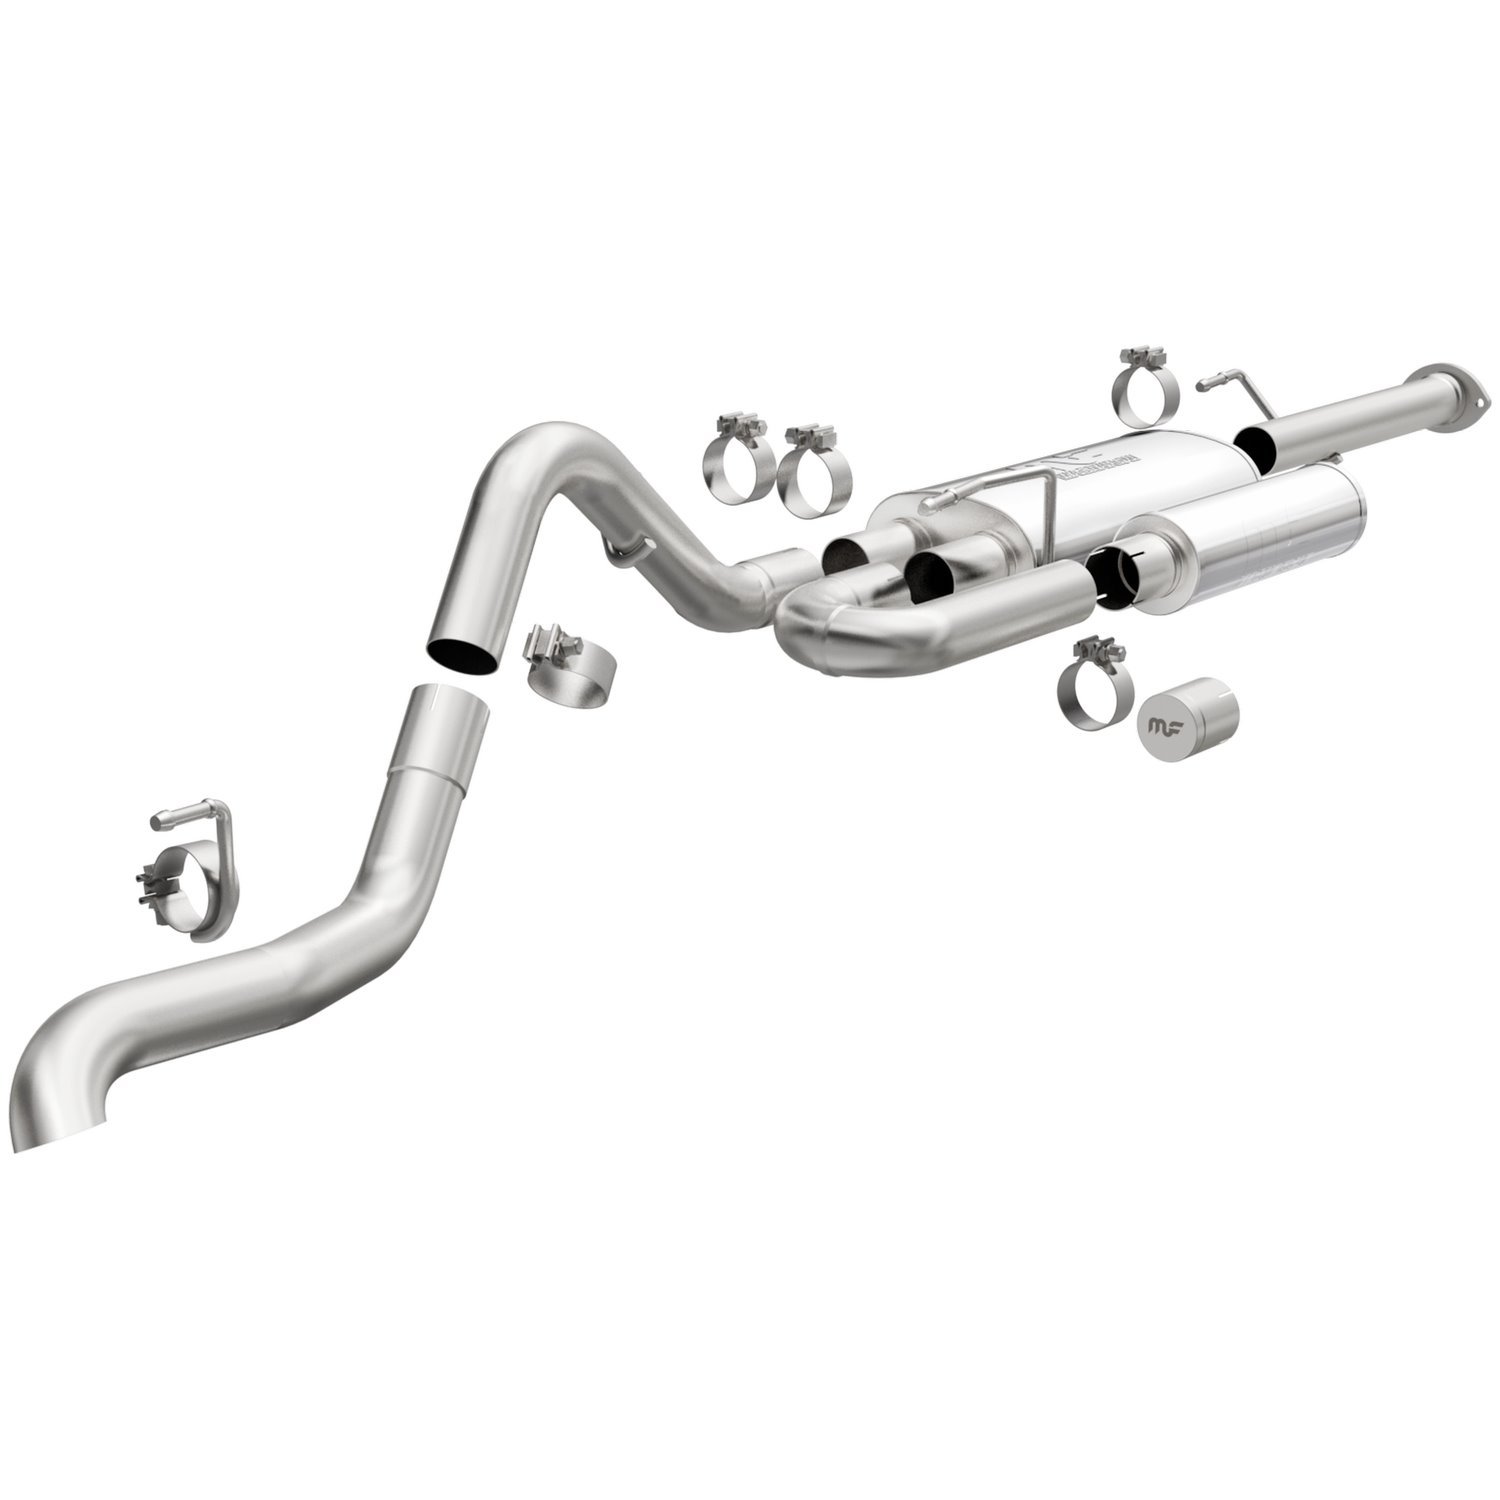 19583 Overland Series Cat-Back Exhaust System fits 2016-2022 Toyota Tacoma 3.5L V6